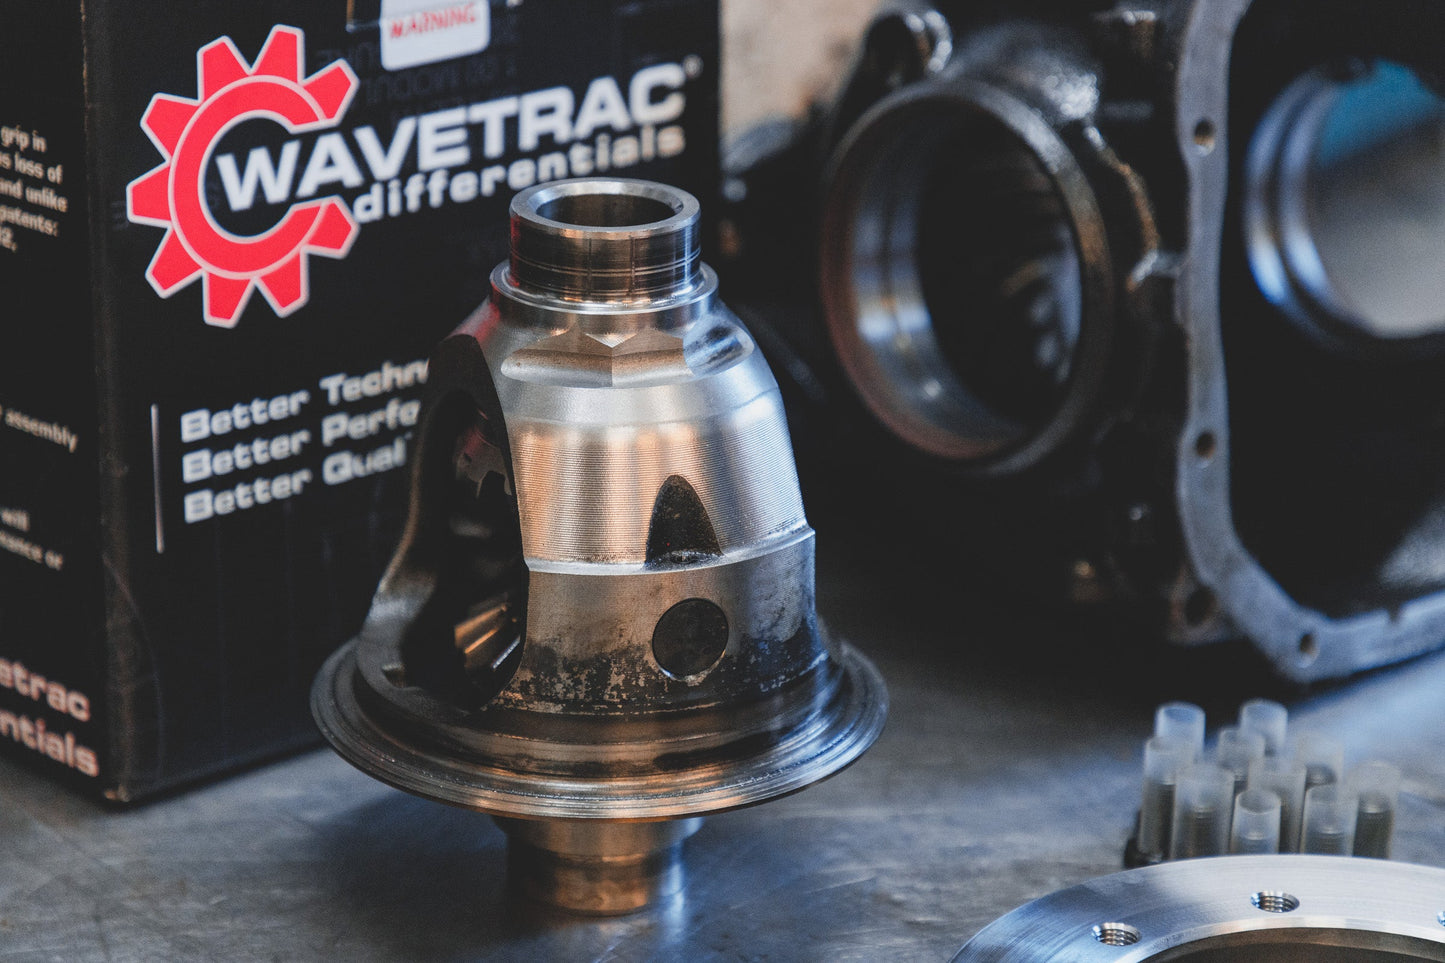 Wavetrac ATB LSD Built Differential for F30 340i + 340iX (incl. LCI) with 2.81 Final Drive Axle